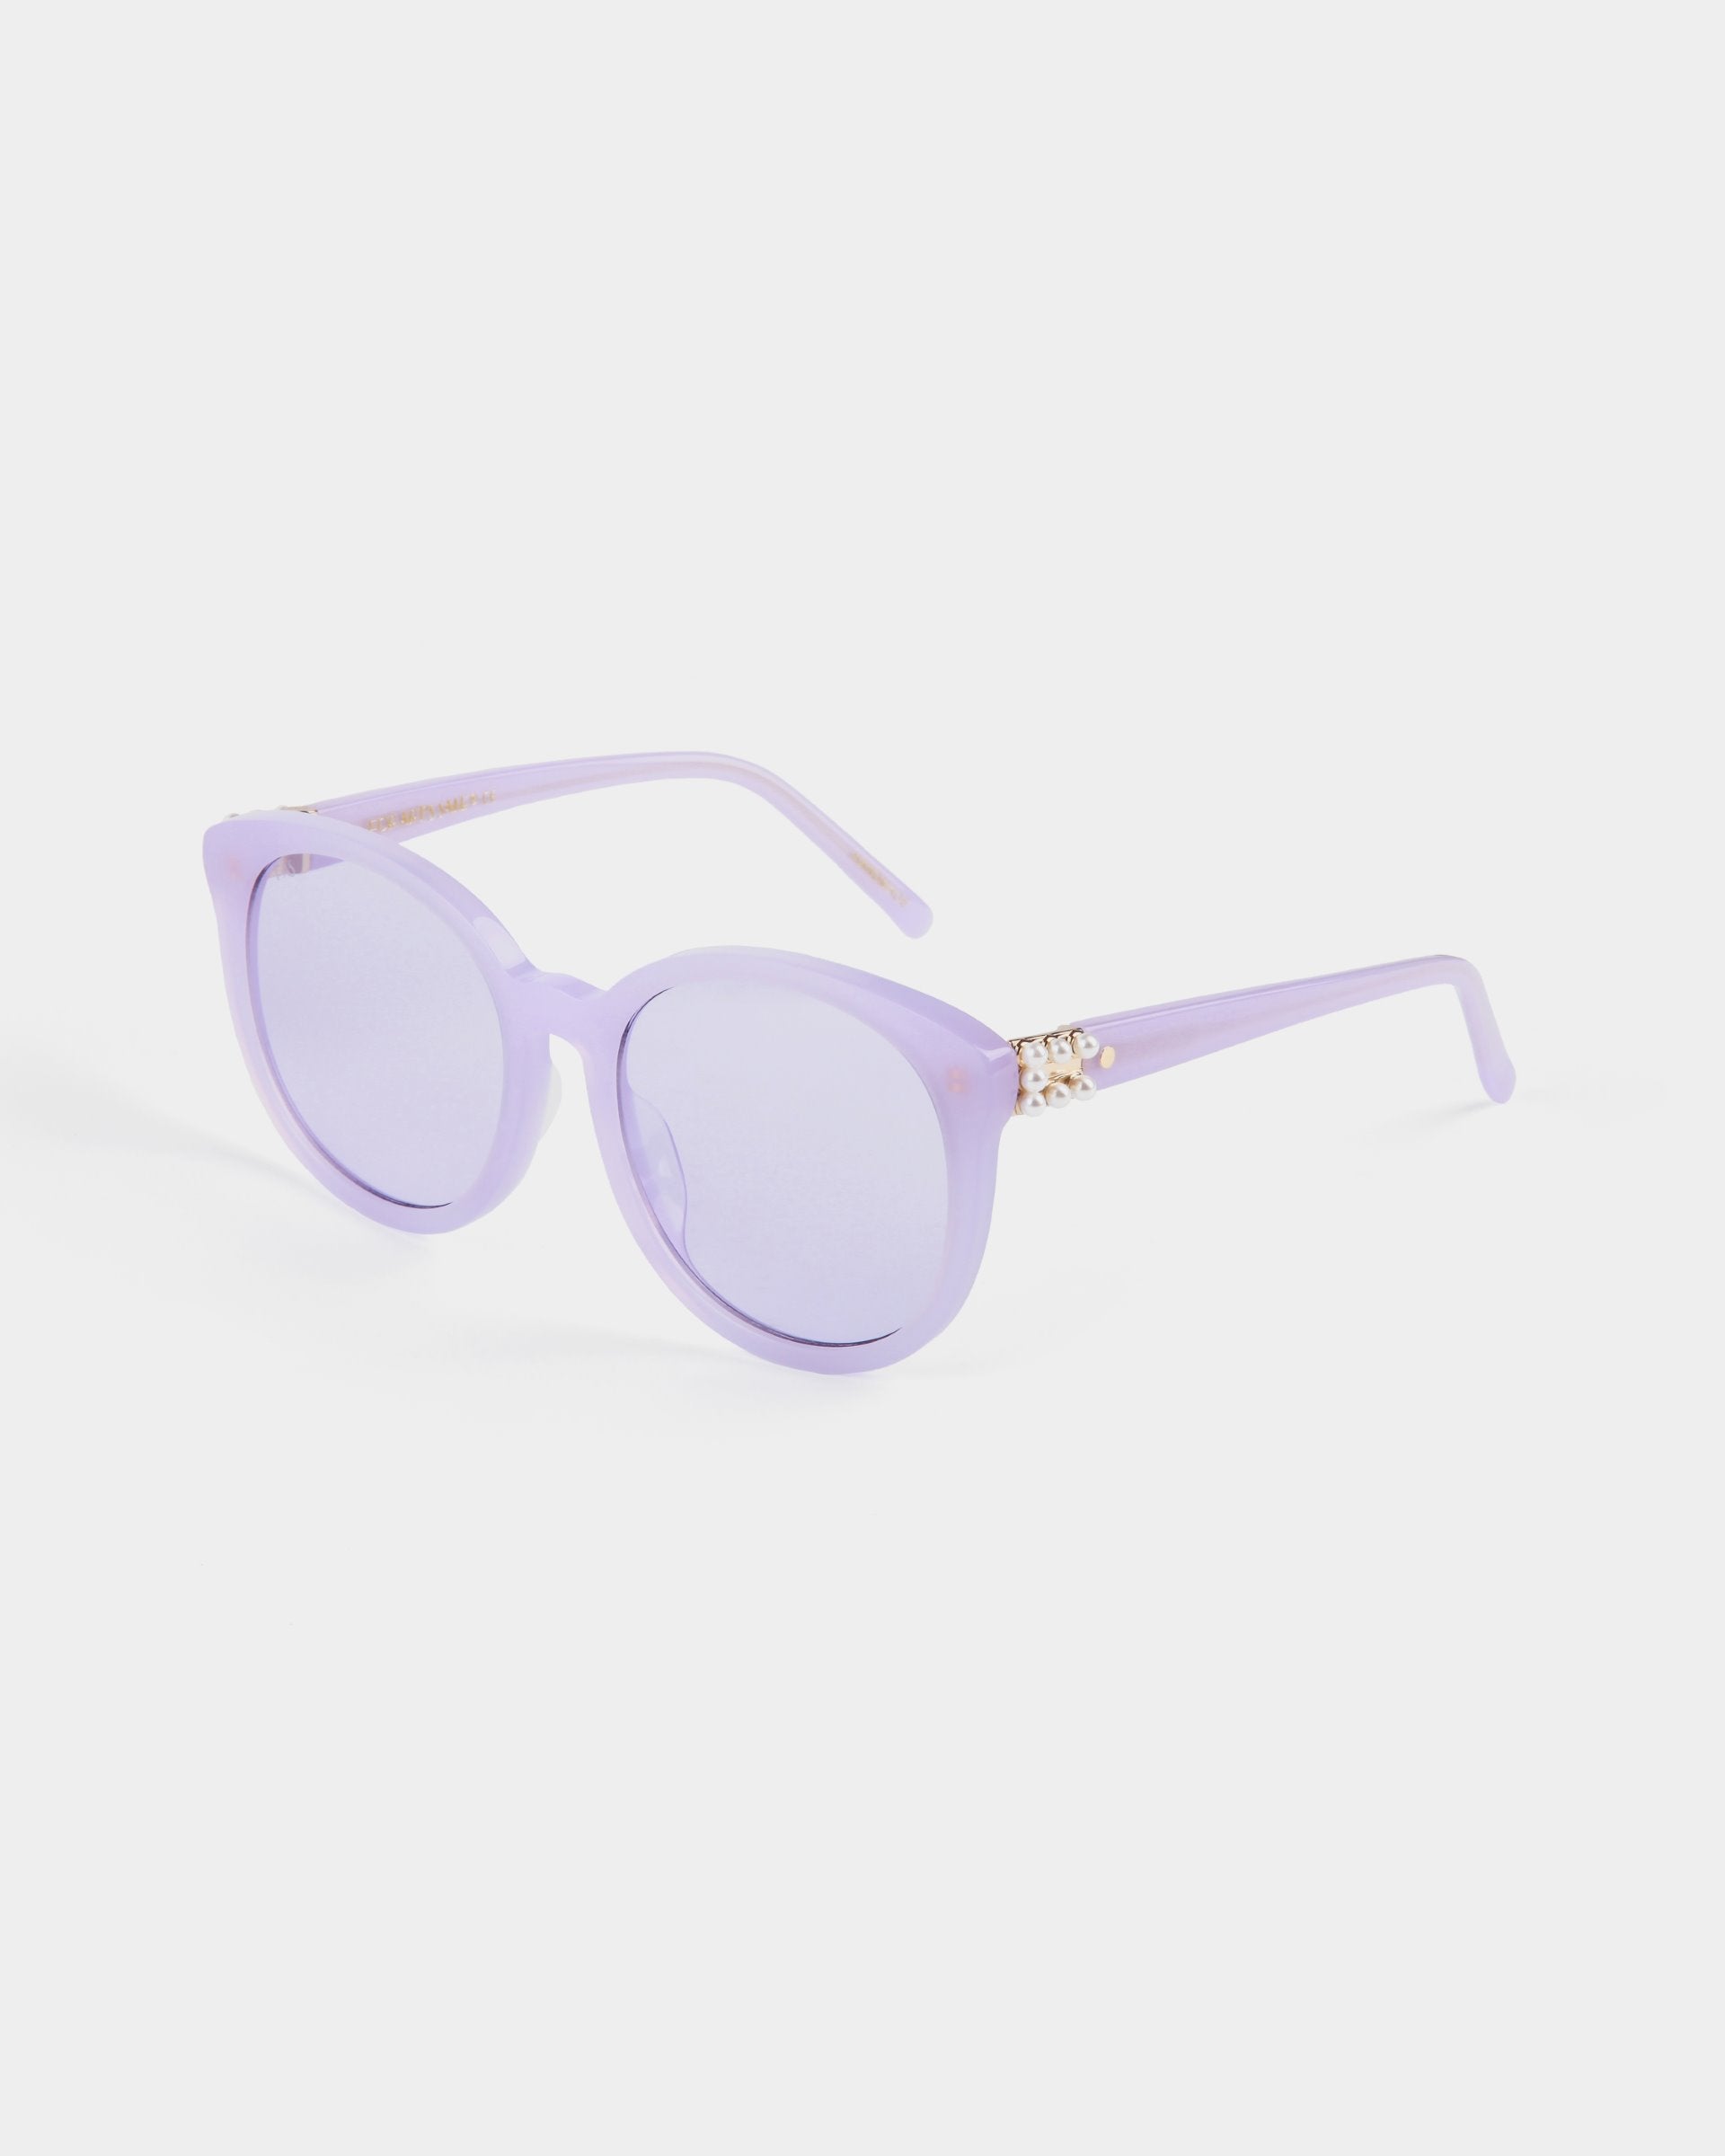 A pair of round lavender Scarlett frames with purple-tinted, shatter-resistant nylon lenses and gold accents on the temples from For Art&#39;s Sake®. The glasses feature UVA &amp; UVB-protected lenses and are positioned against a plain white background.